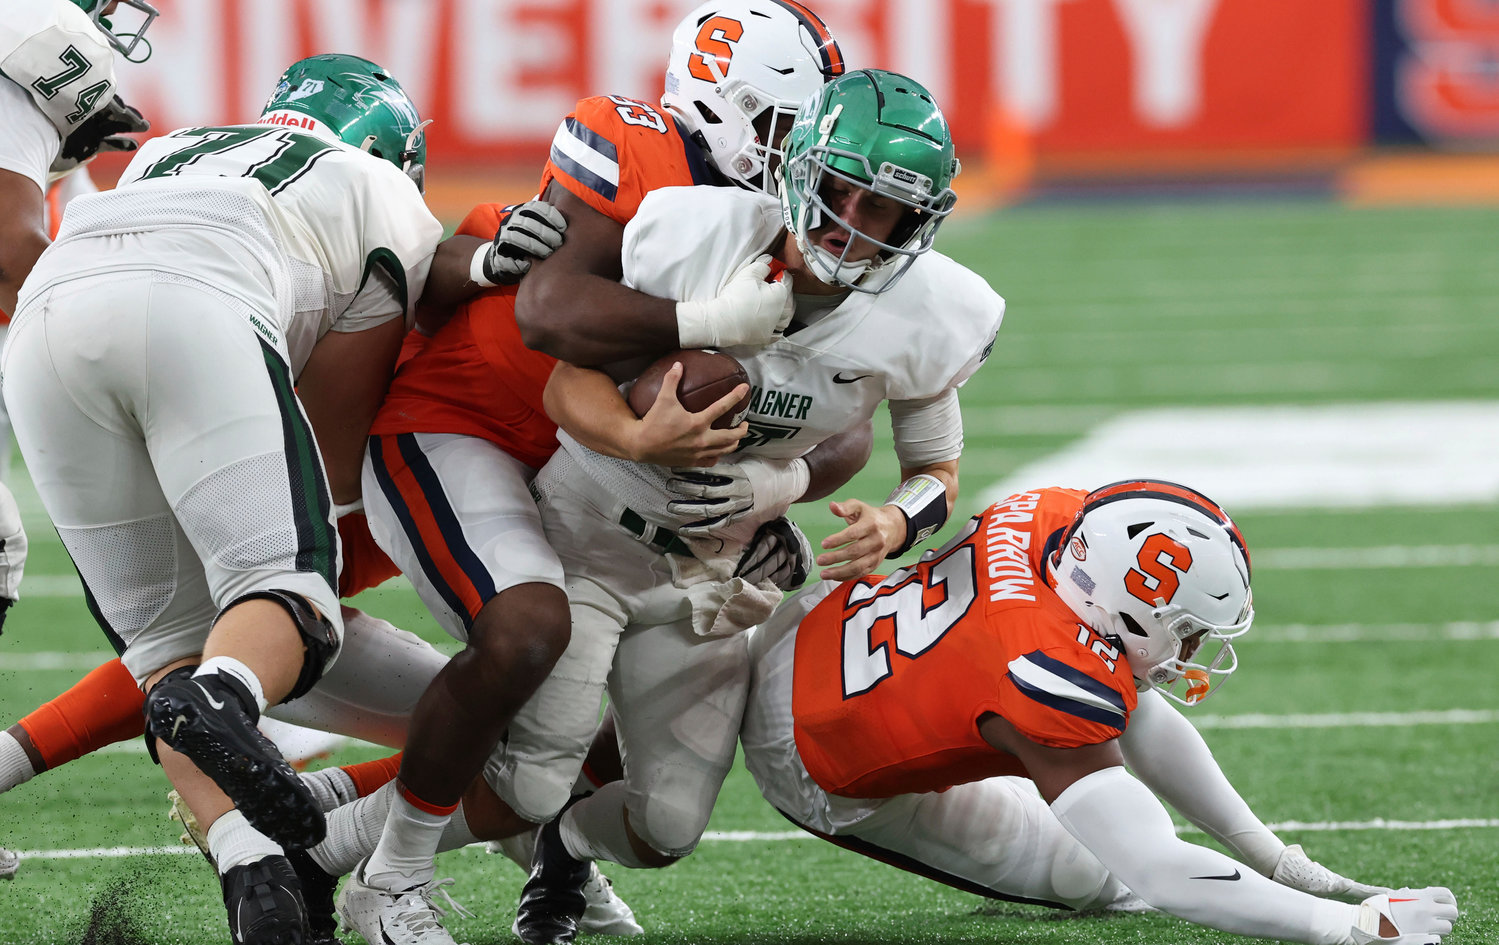 Wagner quarterback Ryan Kraft (7) is brought down behind the line of scrimmage by Syracuse defenders during a game Saturday in Syracuse.